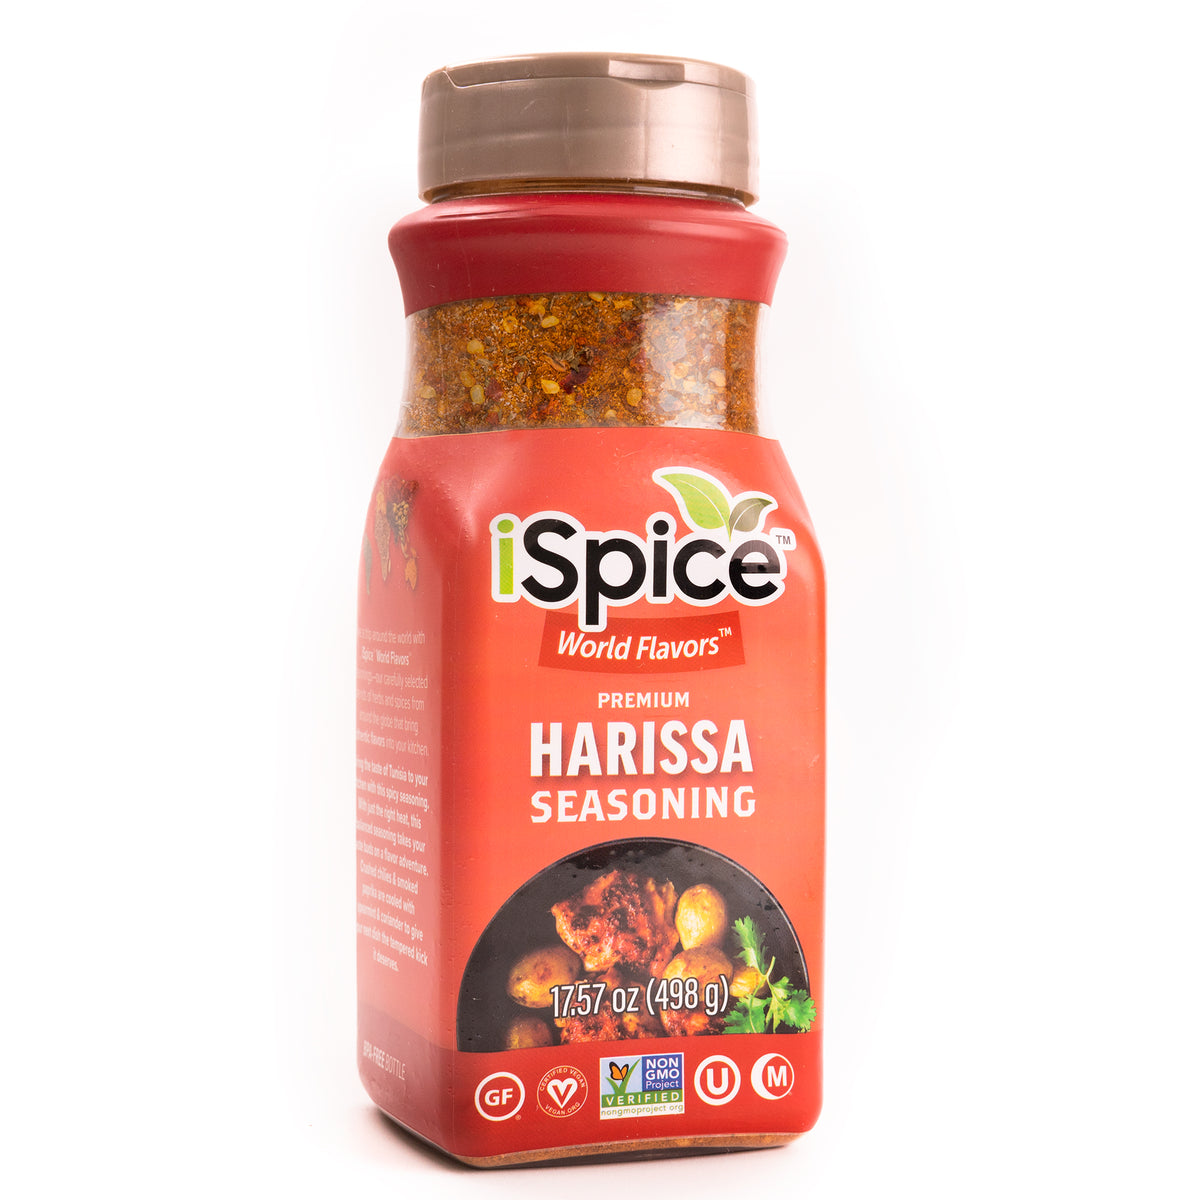 Harness the flavors of North Africa with harissa seasoning! Get to know this unique ingredient and discover ways to add its wonderful kick to any dish.